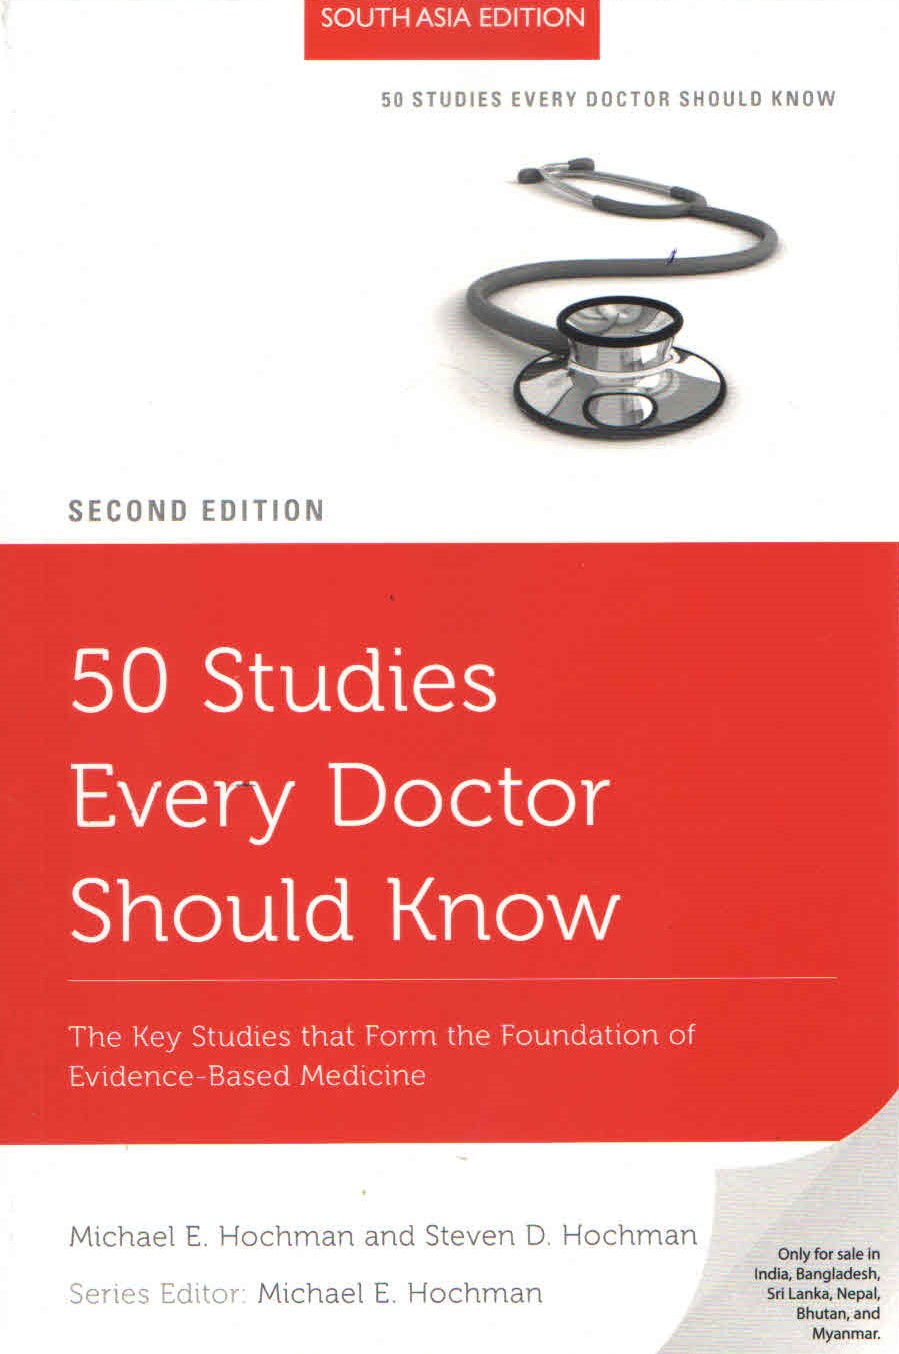 

exclusive-publishers/oxford-university-press/50-studies-every-doctor-should-know-9780197775837